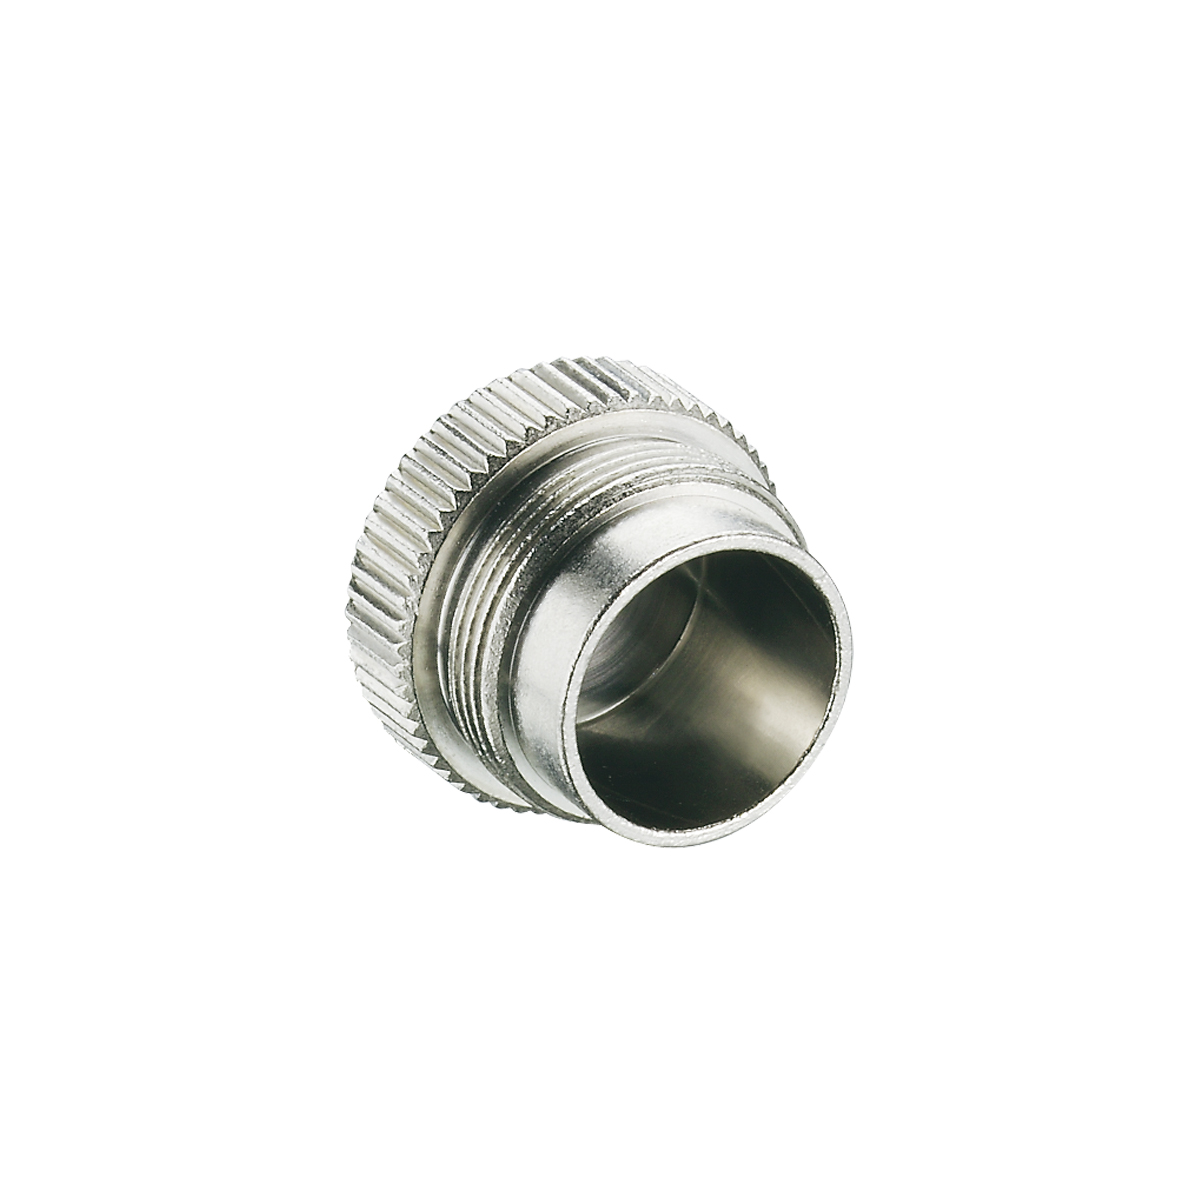 Lumberg: 38199 (Series 03 | Circular connectors with threaded joint M16 acc. to IEC 61076-2-106, IP40/IP68)